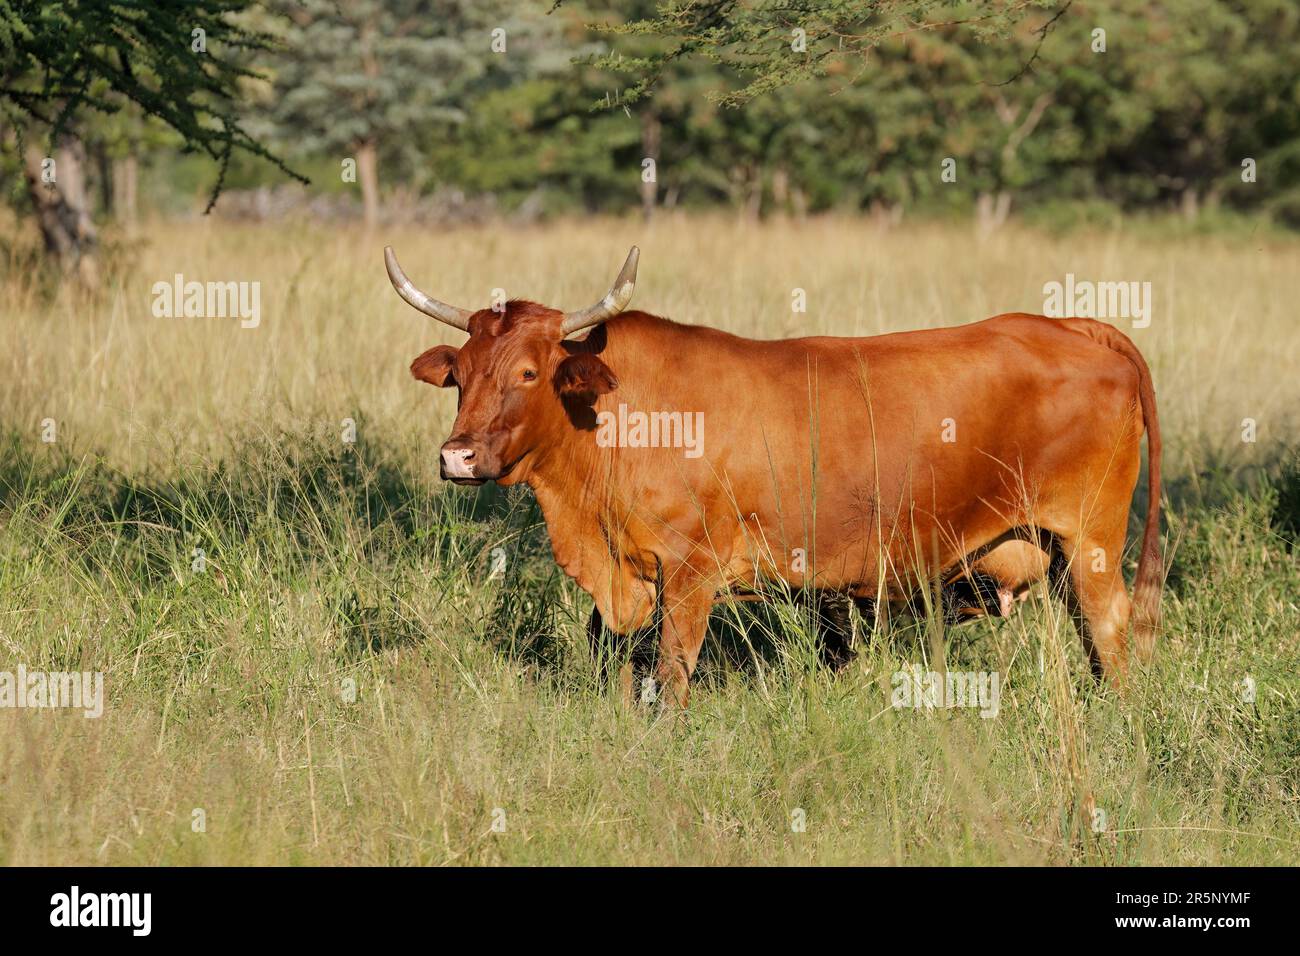 A free-range cow in native grassland on a rural farm, South Africa Stock Photo